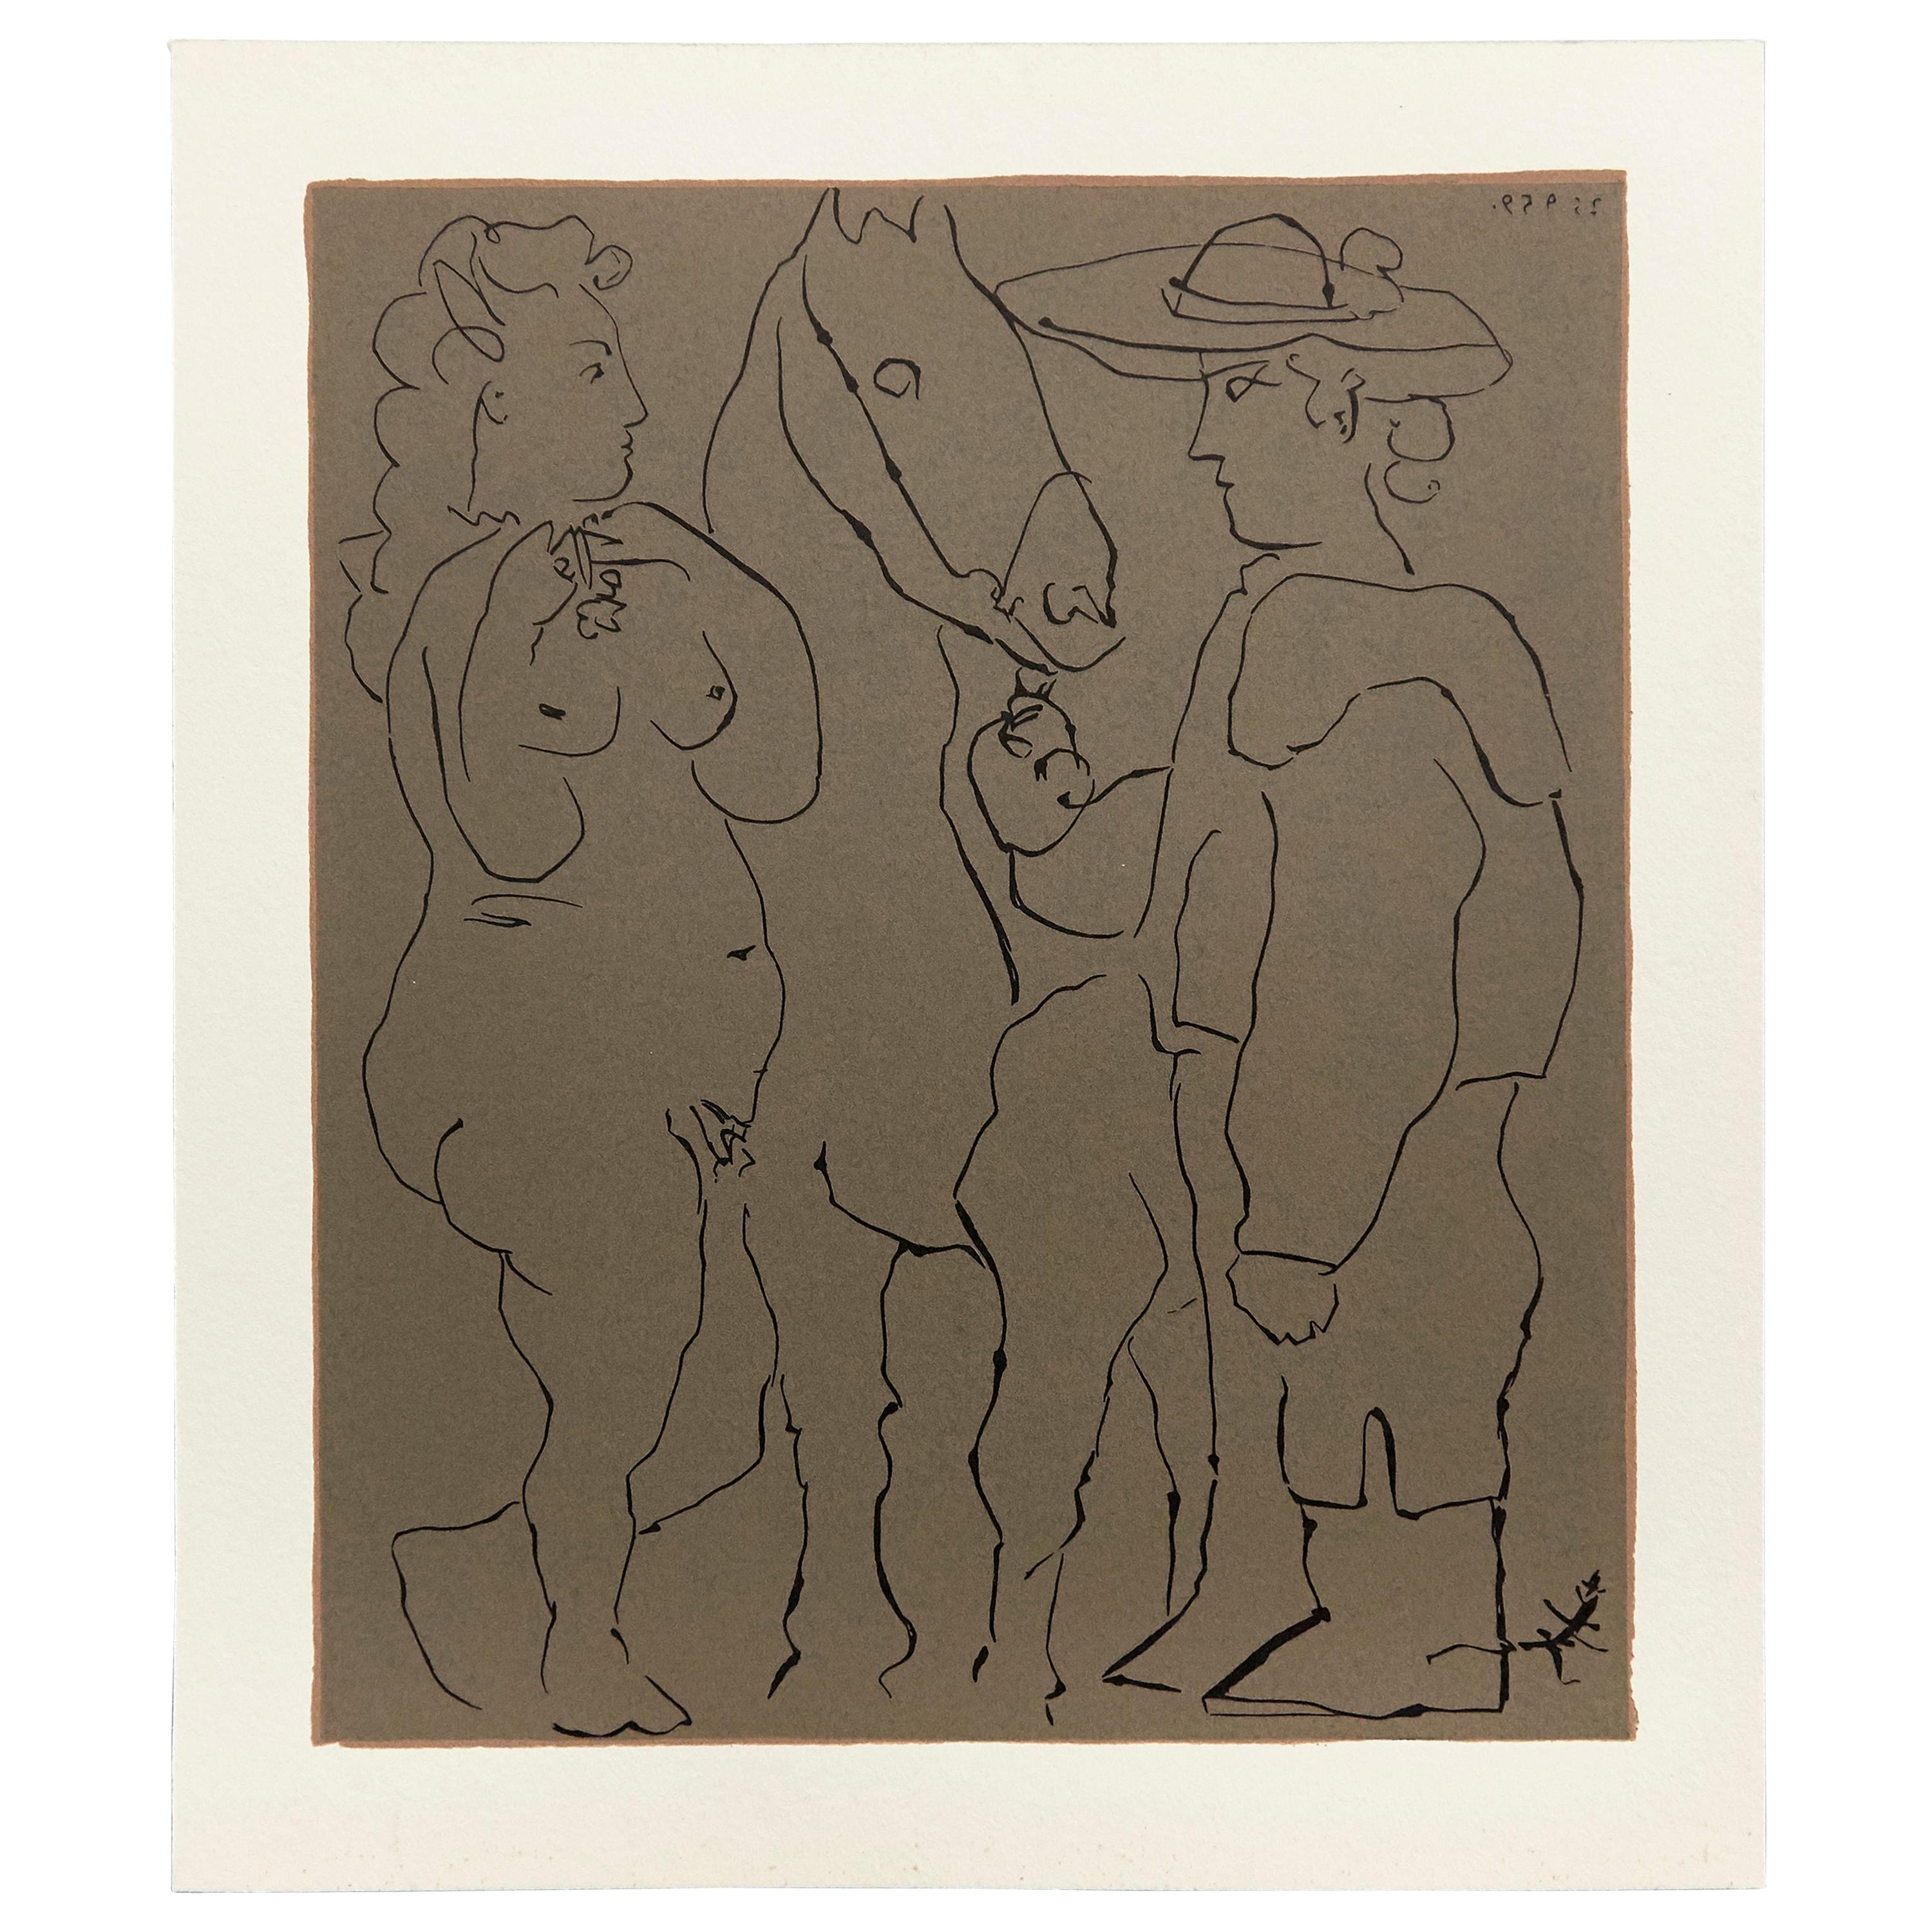 Picasso Drawing Lithography